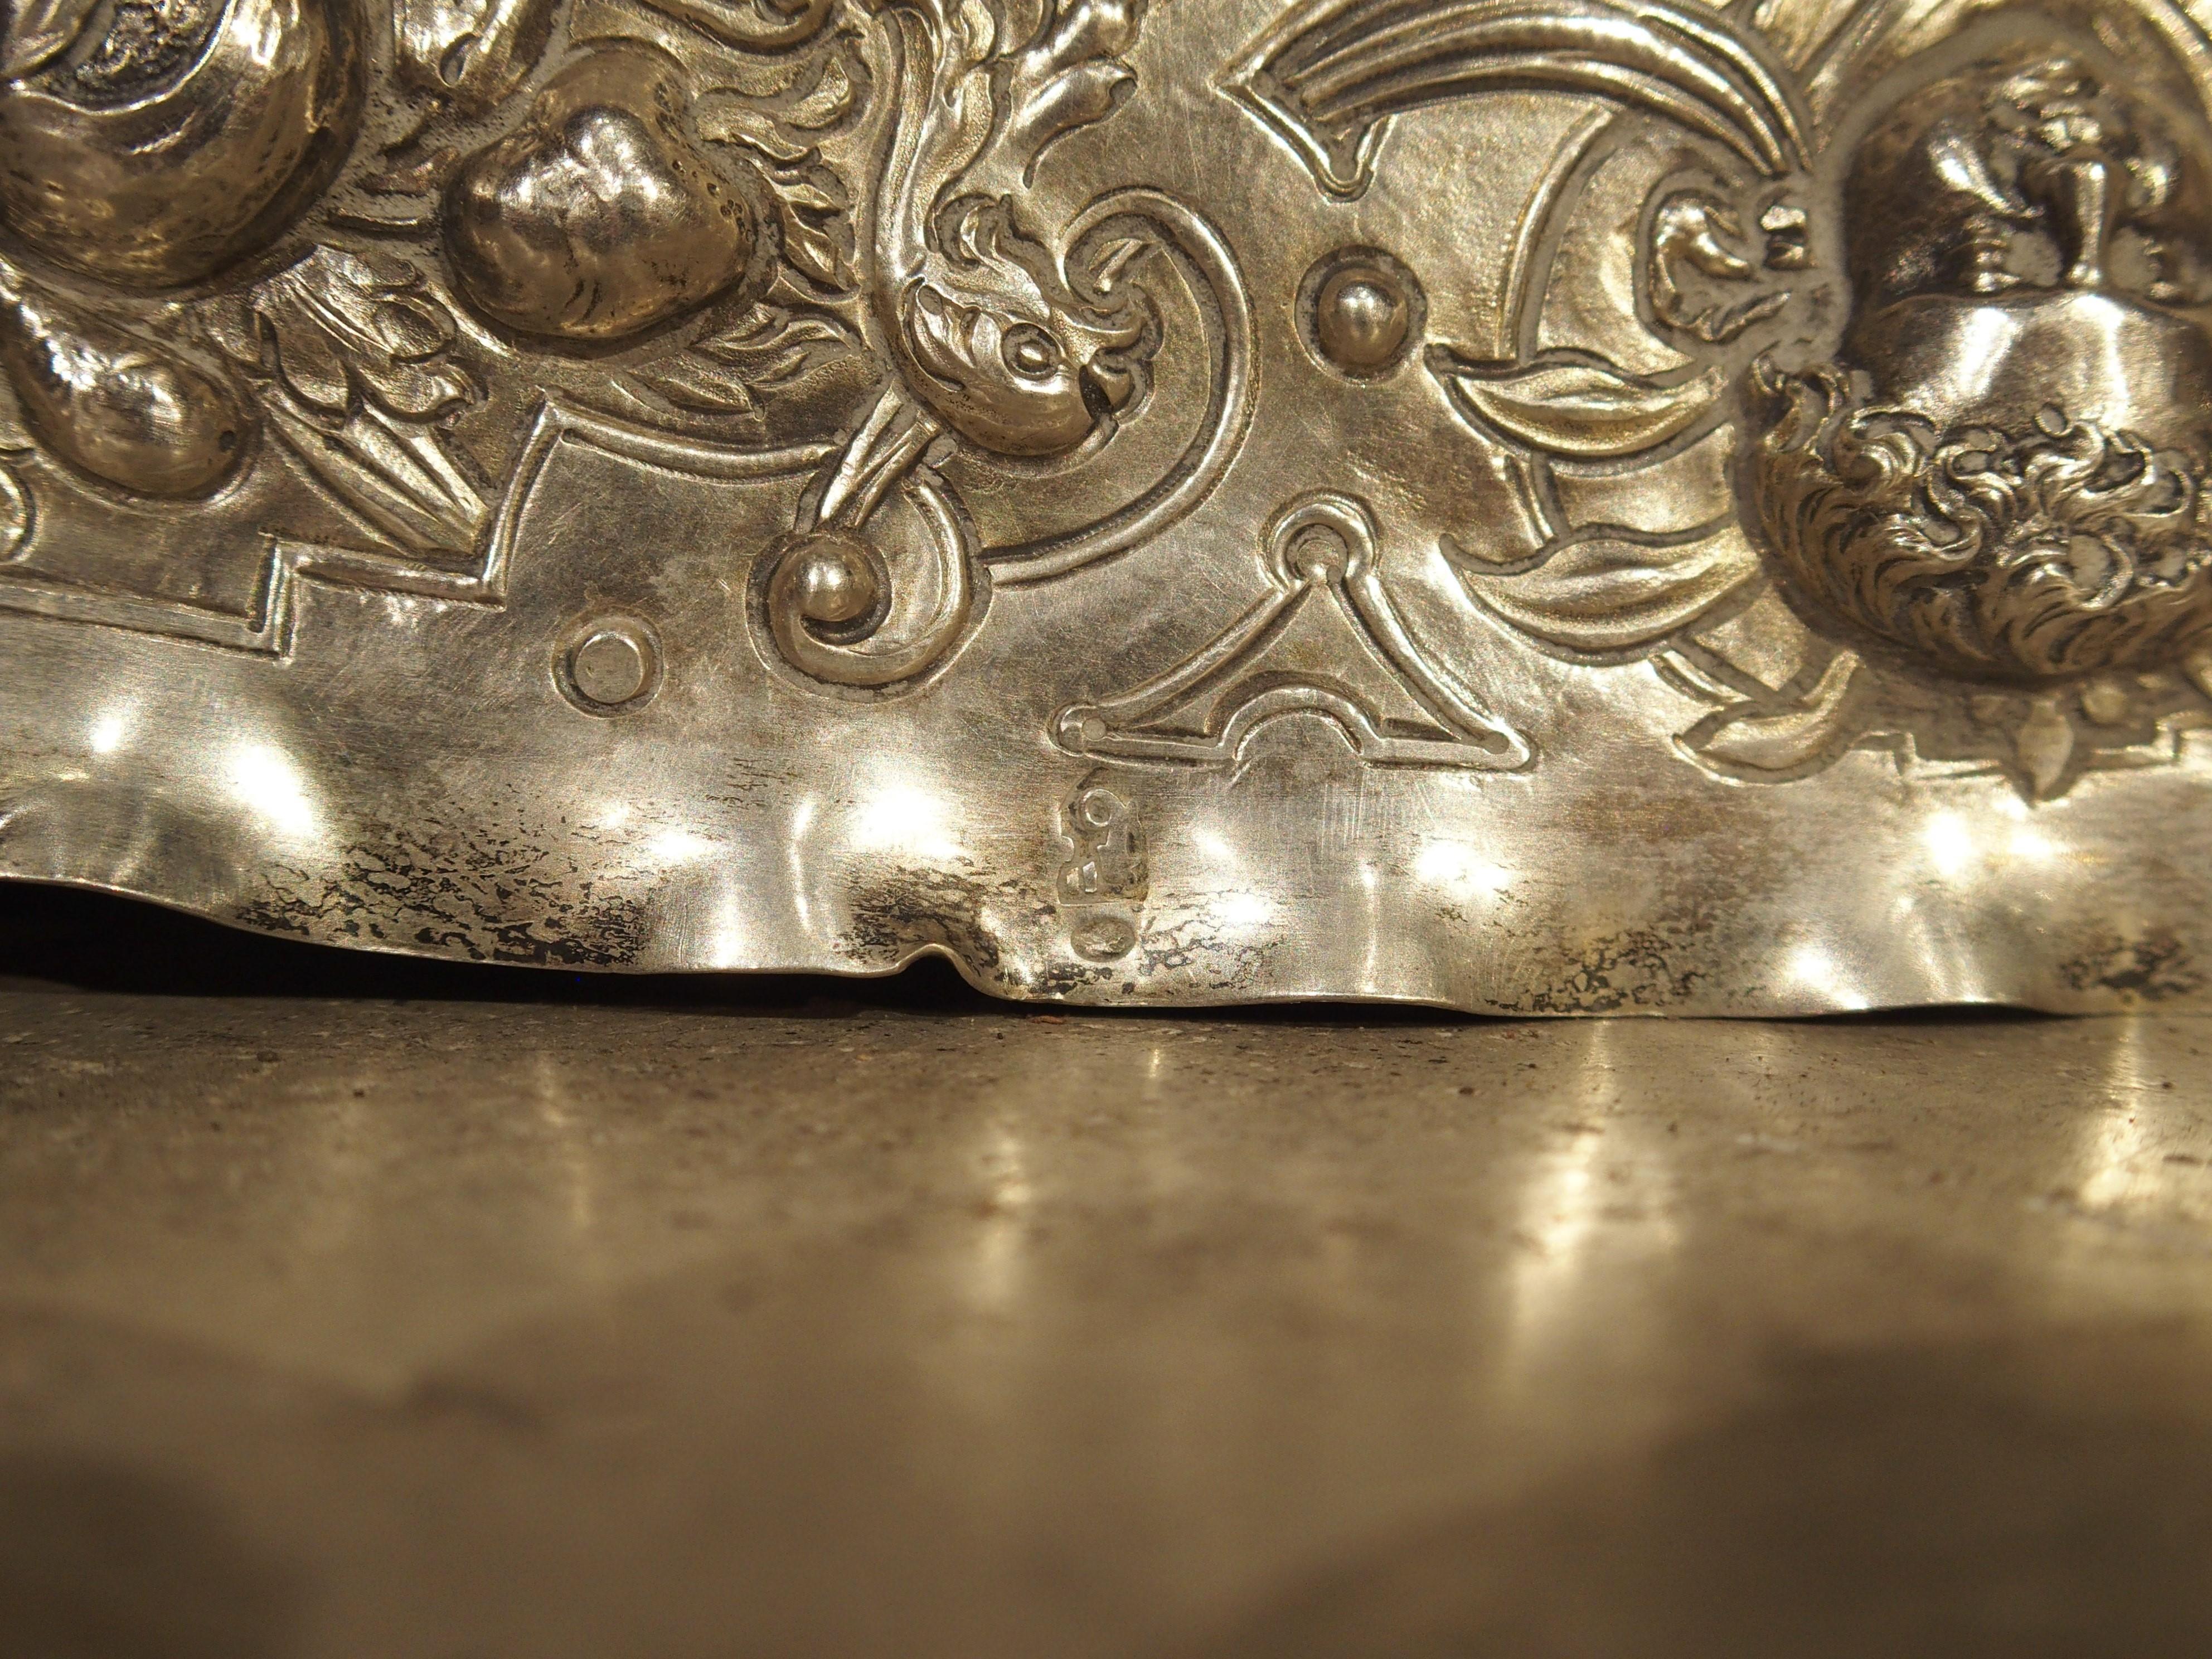 This richly decorated silver serving tray with repousse work is from Germany’s Gründerzeit period, circa 1850. The exquisite repoussage depicts an unknown military skirmish of soldiers with spears and swords on horseback. The chaotic action of the